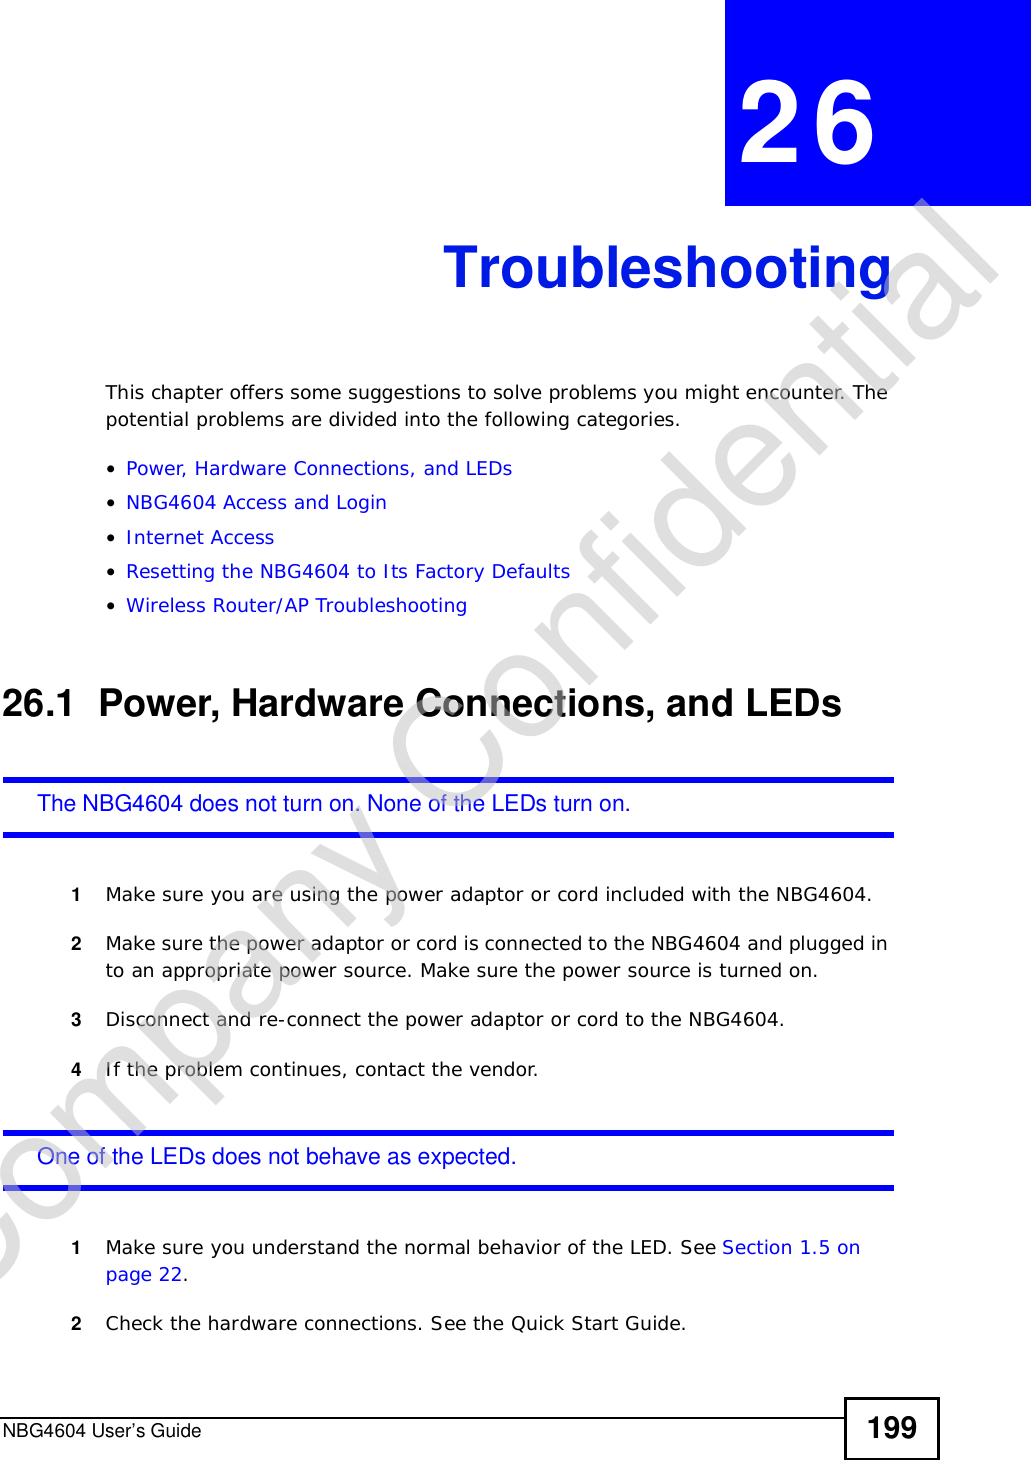 NBG4604 User’s Guide 199CHAPTER 26TroubleshootingThis chapter offers some suggestions to solve problems you might encounter. The potential problems are divided into the following categories. •Power, Hardware Connections, and LEDs•NBG4604 Access and Login•Internet Access•Resetting the NBG4604 to Its Factory Defaults•Wireless Router/AP Troubleshooting26.1  Power, Hardware Connections, and LEDsThe NBG4604 does not turn on. None of the LEDs turn on.1Make sure you are using the power adaptor or cord included with the NBG4604.2Make sure the power adaptor or cord is connected to the NBG4604 and plugged in to an appropriate power source. Make sure the power source is turned on.3Disconnect and re-connect the power adaptor or cord to the NBG4604.4If the problem continues, contact the vendor.One of the LEDs does not behave as expected.1Make sure you understand the normal behavior of the LED. See Section 1.5 on page 22.2Check the hardware connections. See the Quick Start Guide. Company Confidential